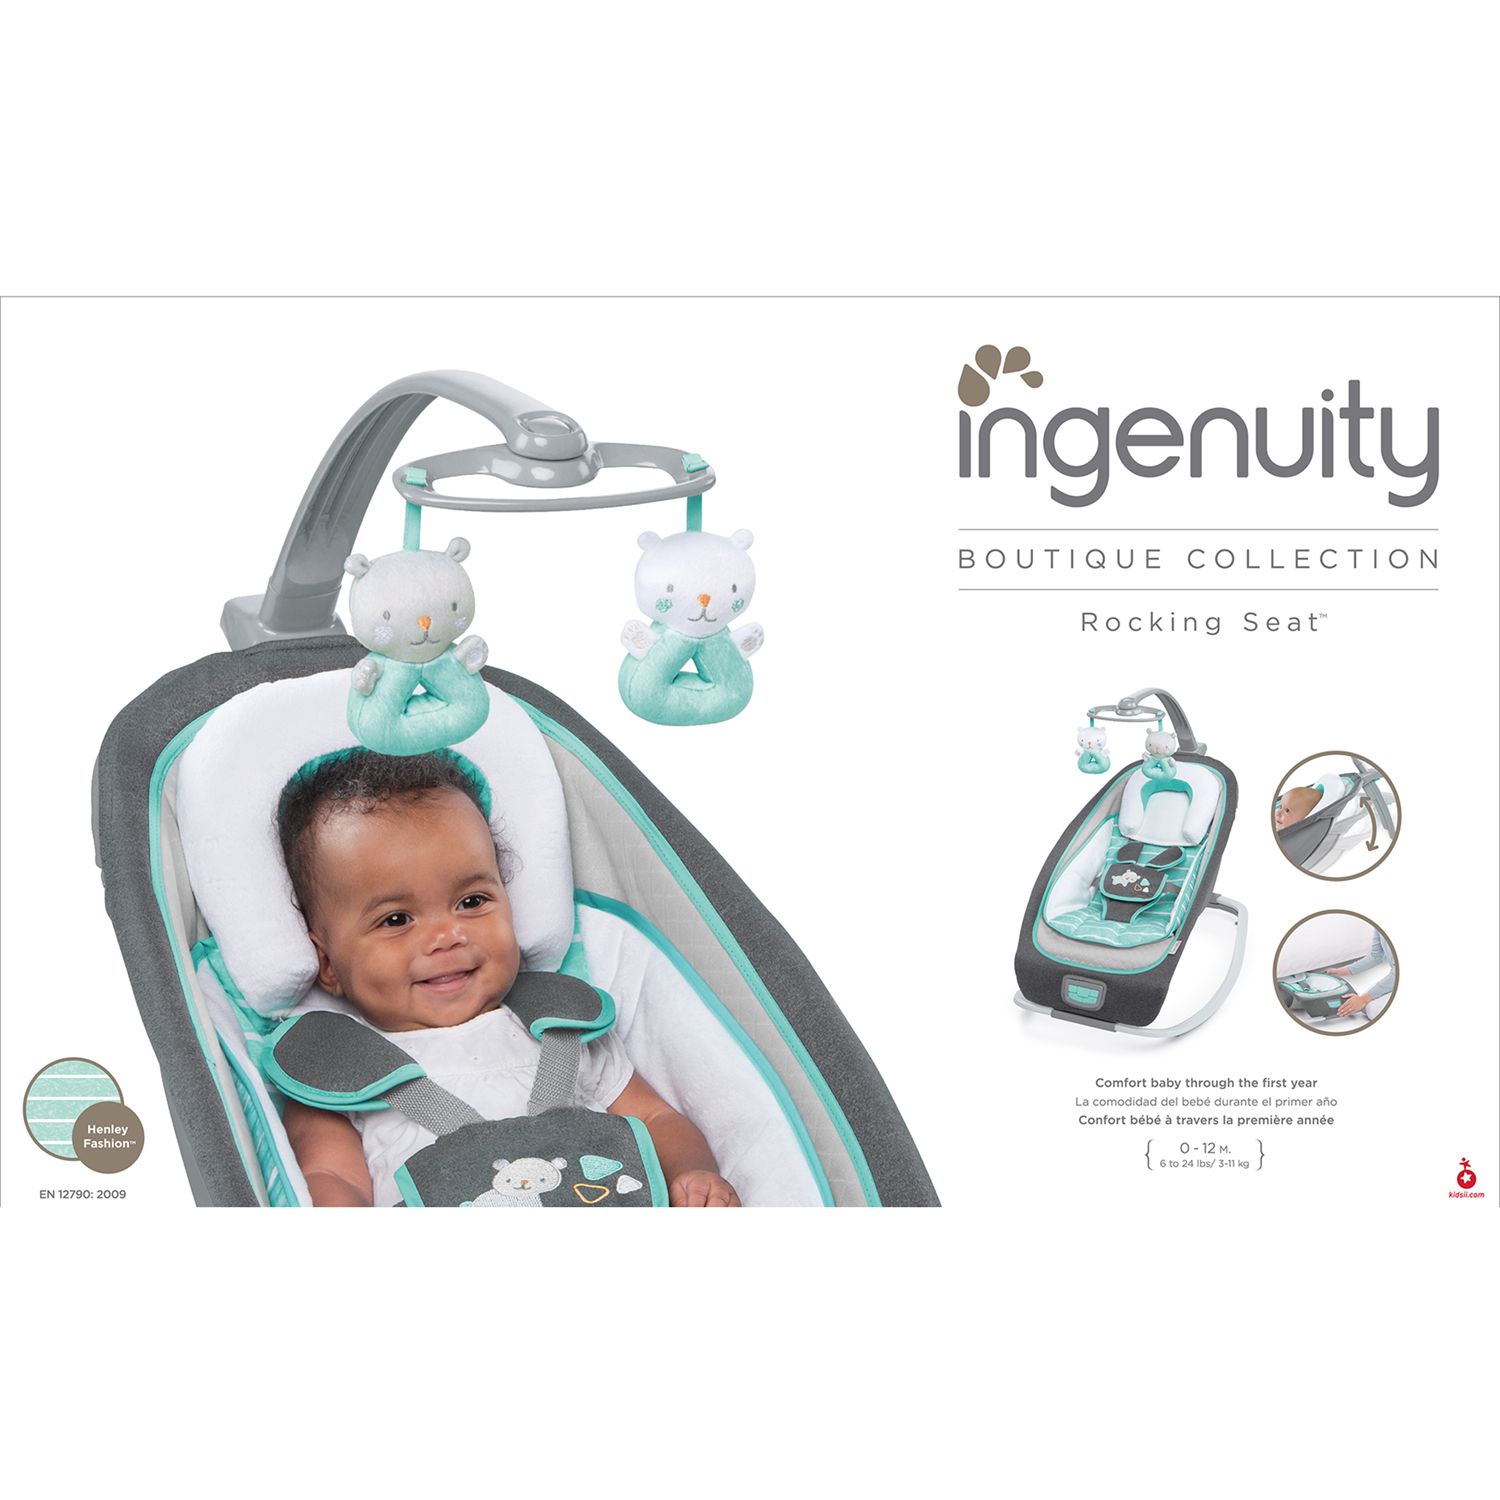 ingenuity boutique collection rocking seat review